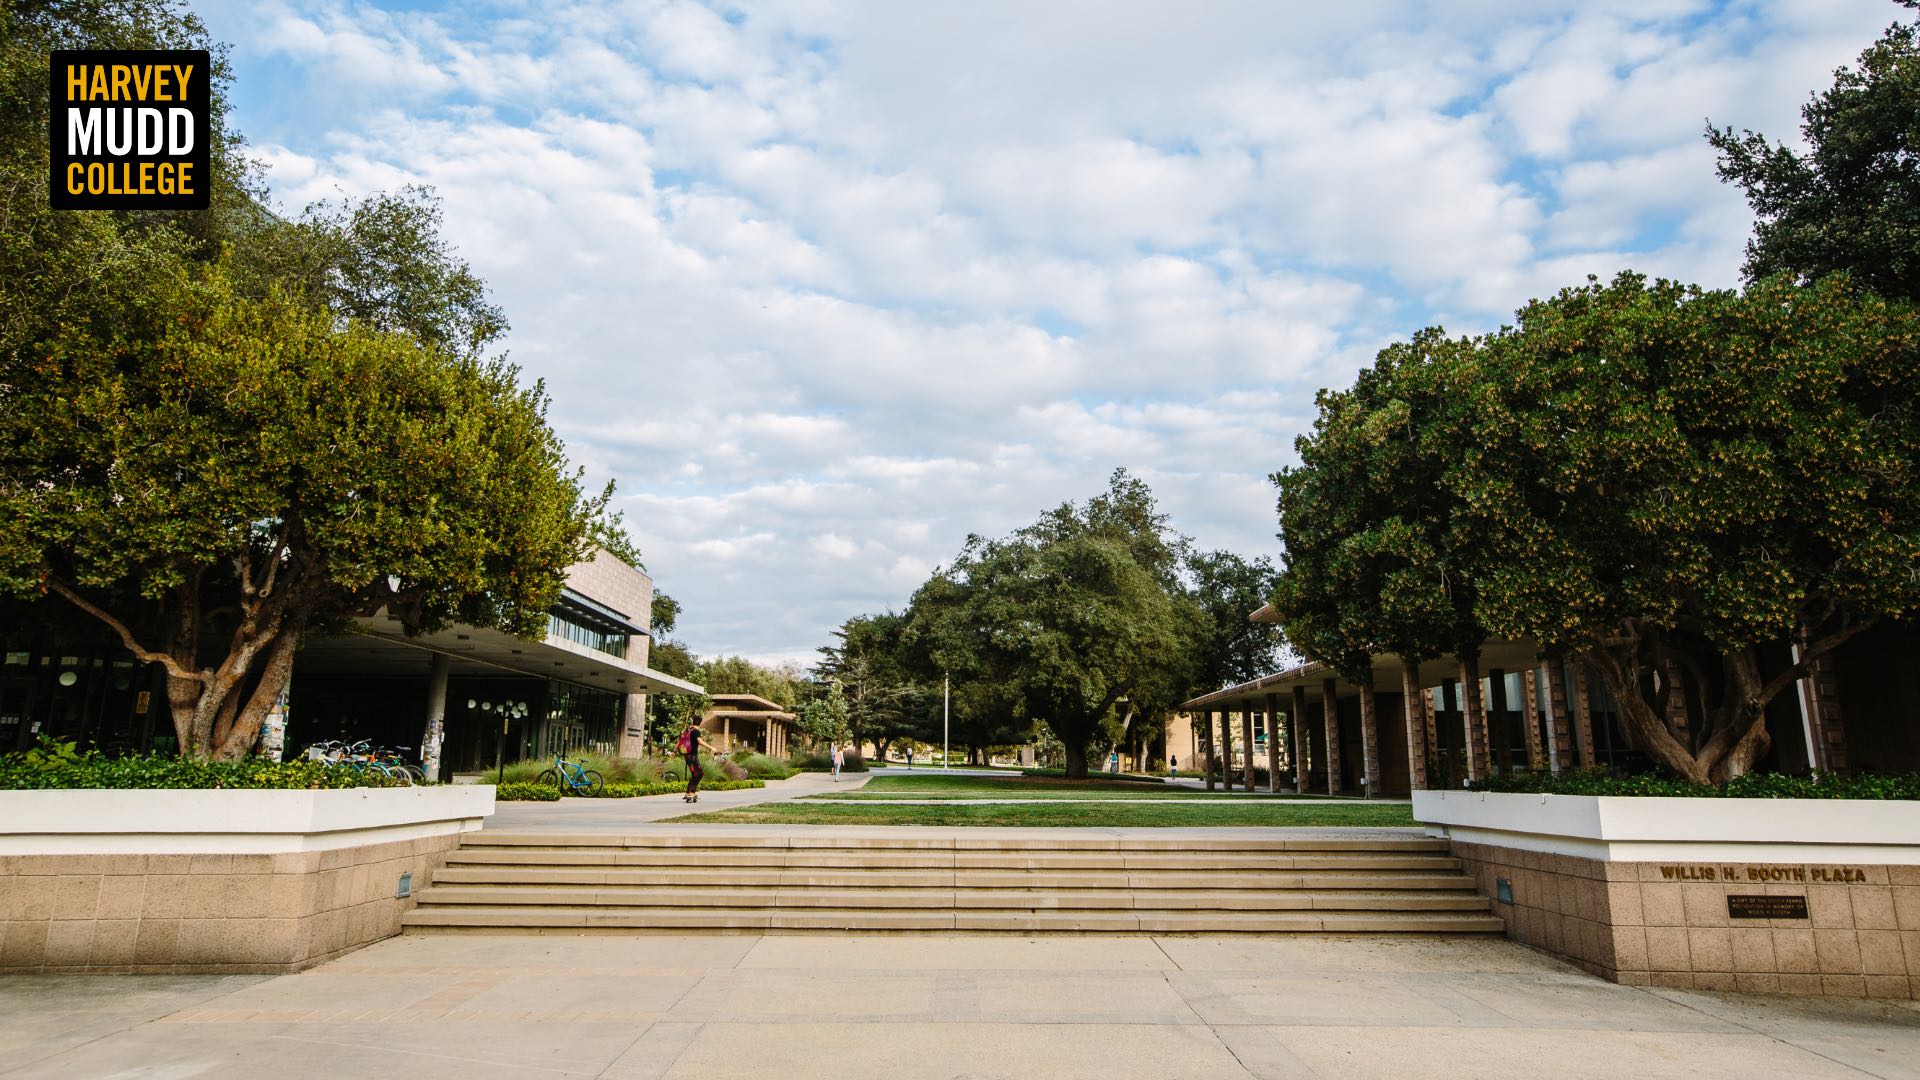 Harvey Mudd College Great Mall, looking east